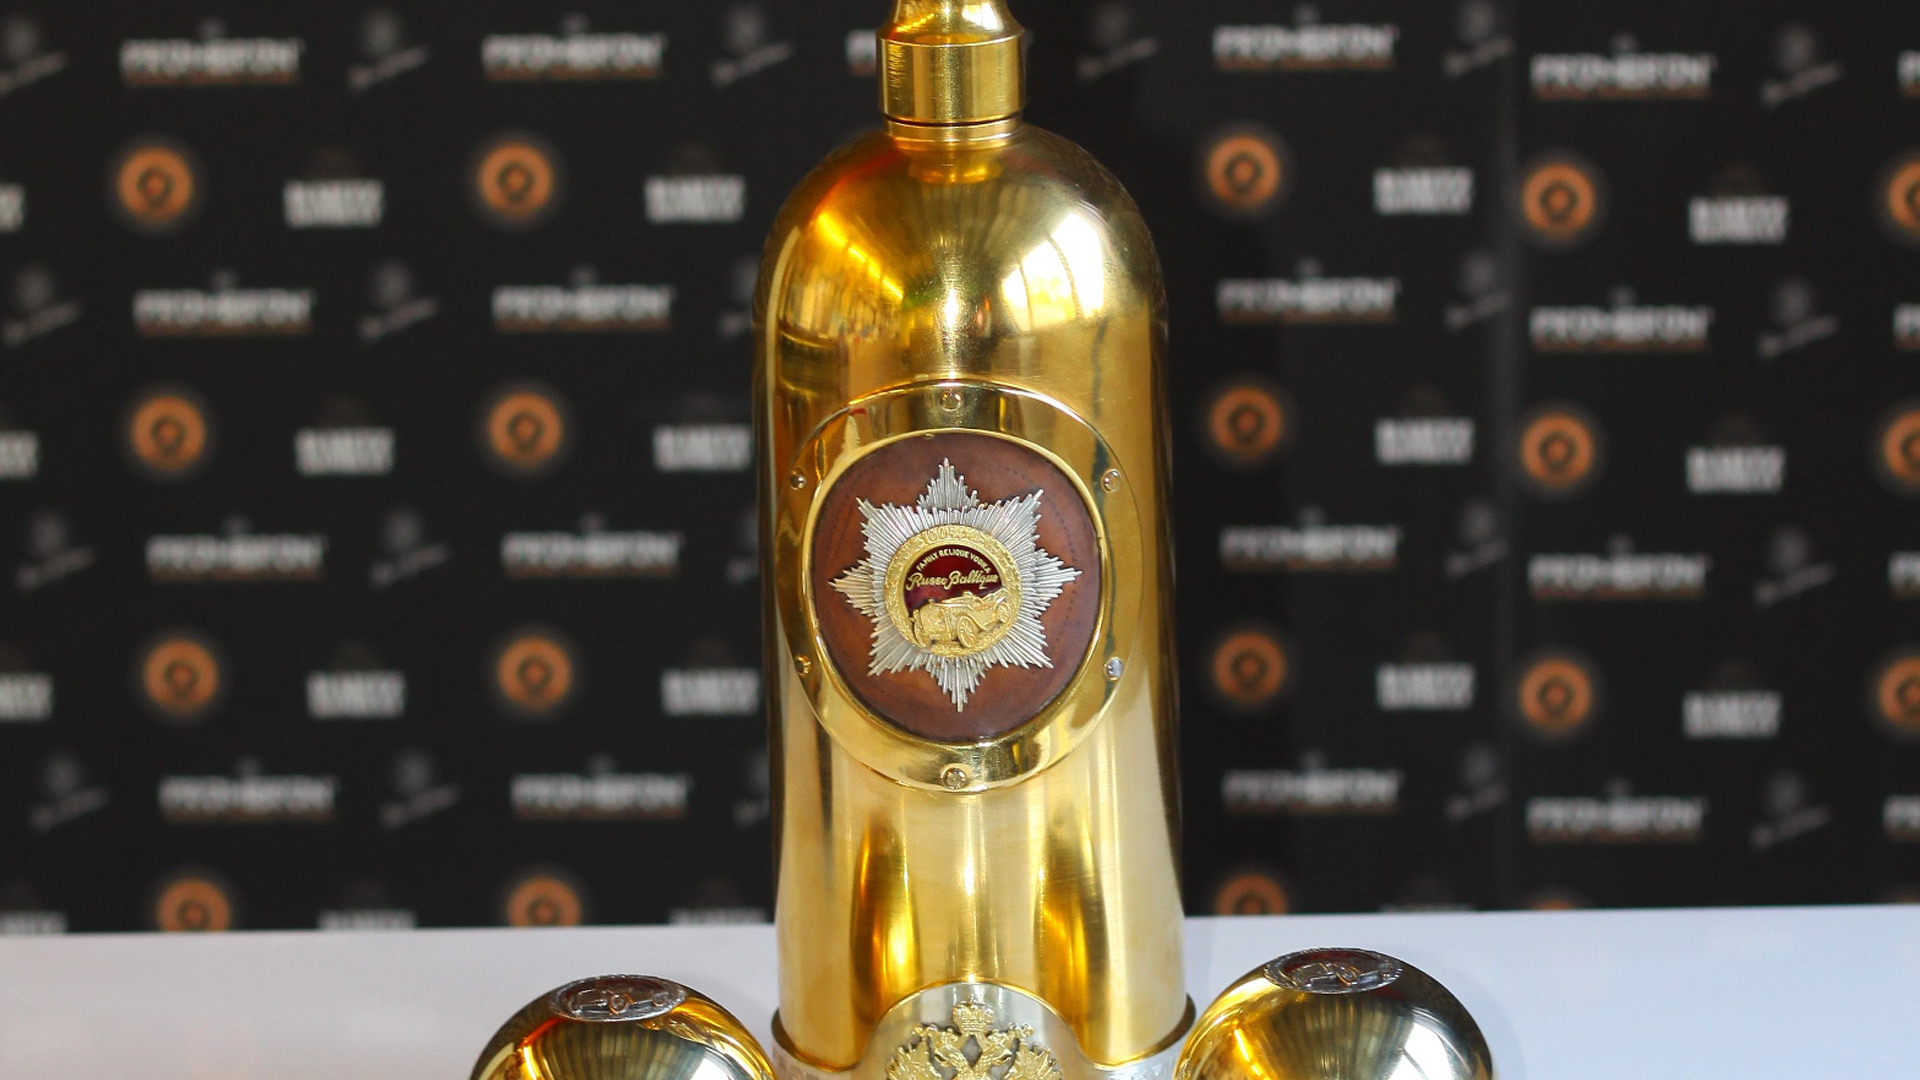 RussoBaltique Vodka and Imperial Prix 1912 Caviar at 2015 Cannes Film Festival charity auction